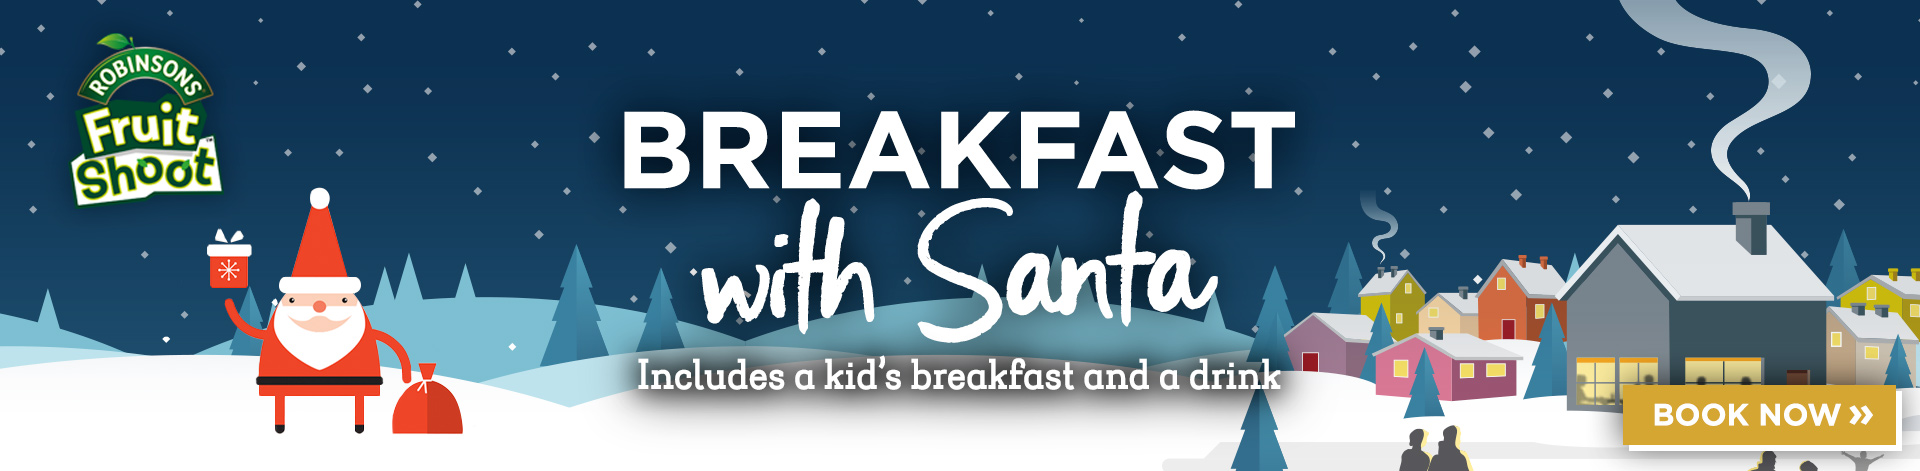 Breakfast with Santa menu at The Copperfield